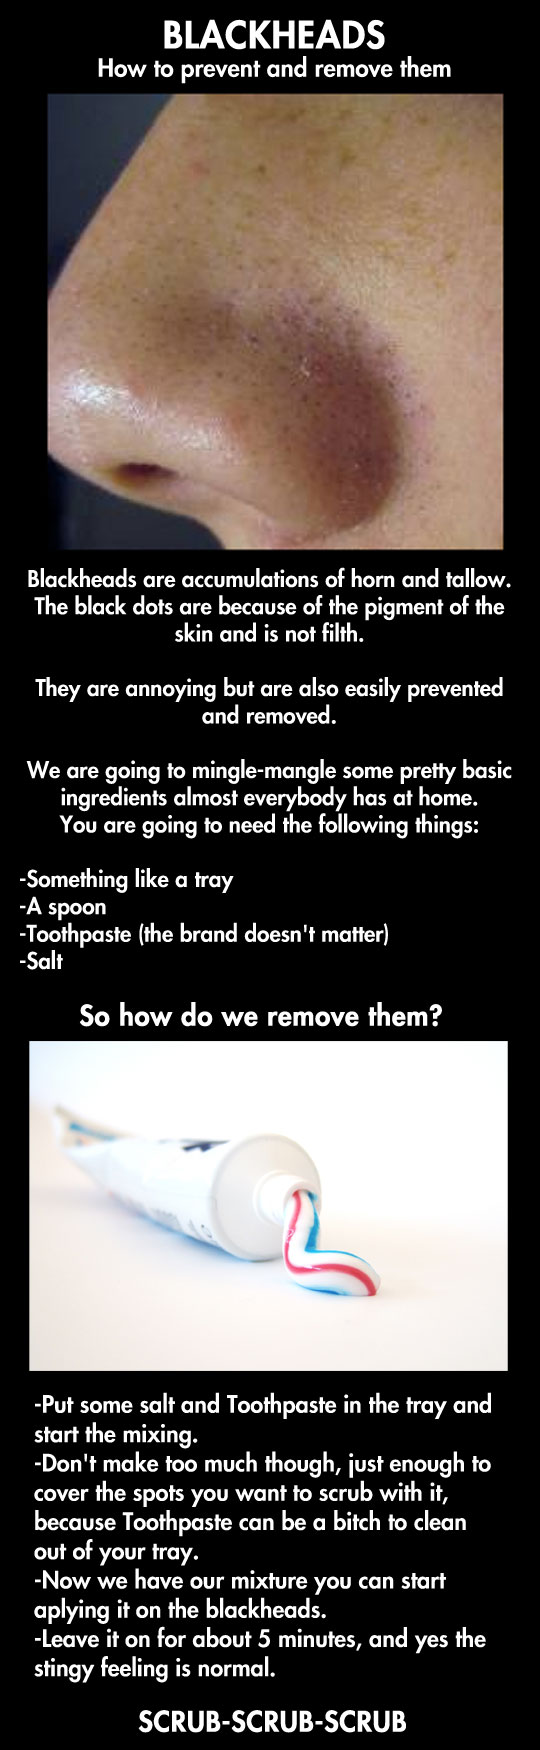 How To Get Rid Of Those Annoying Blackheads